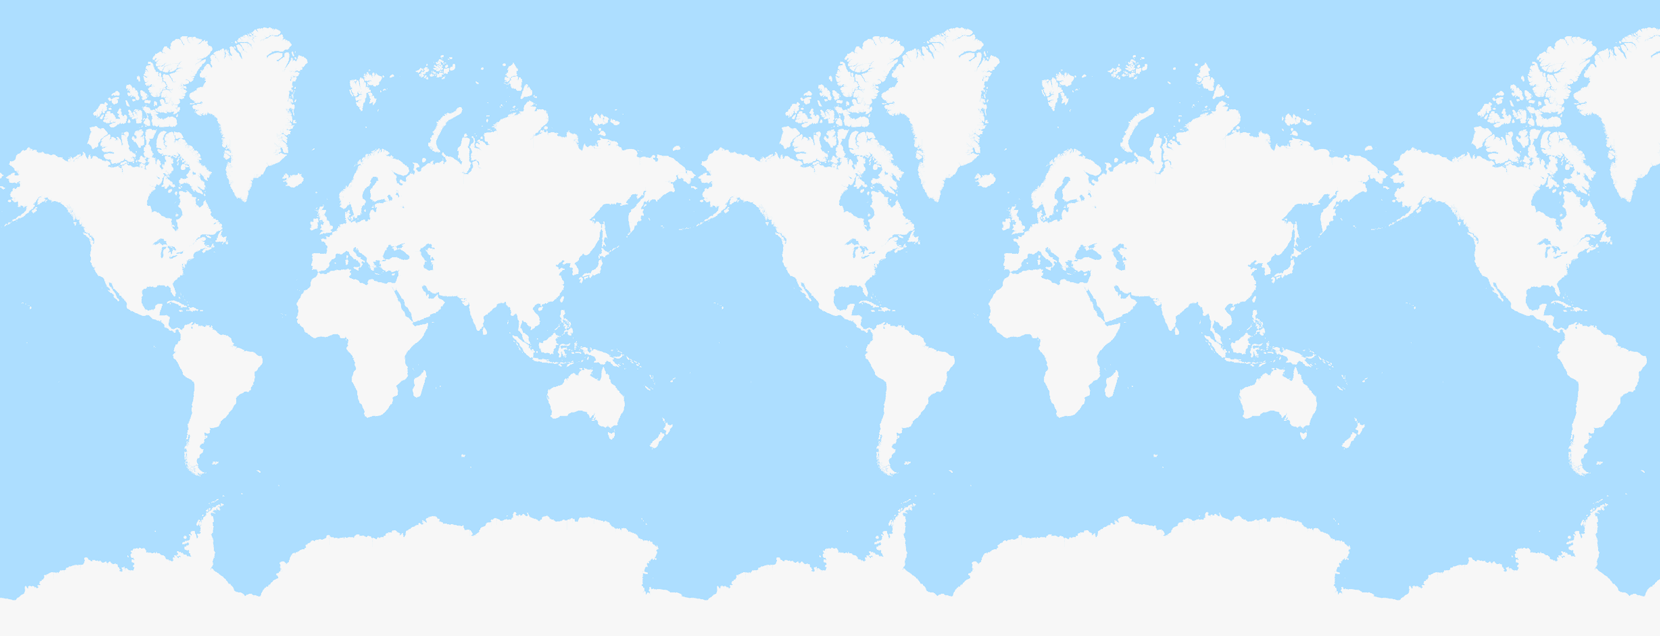 Google Map of the world